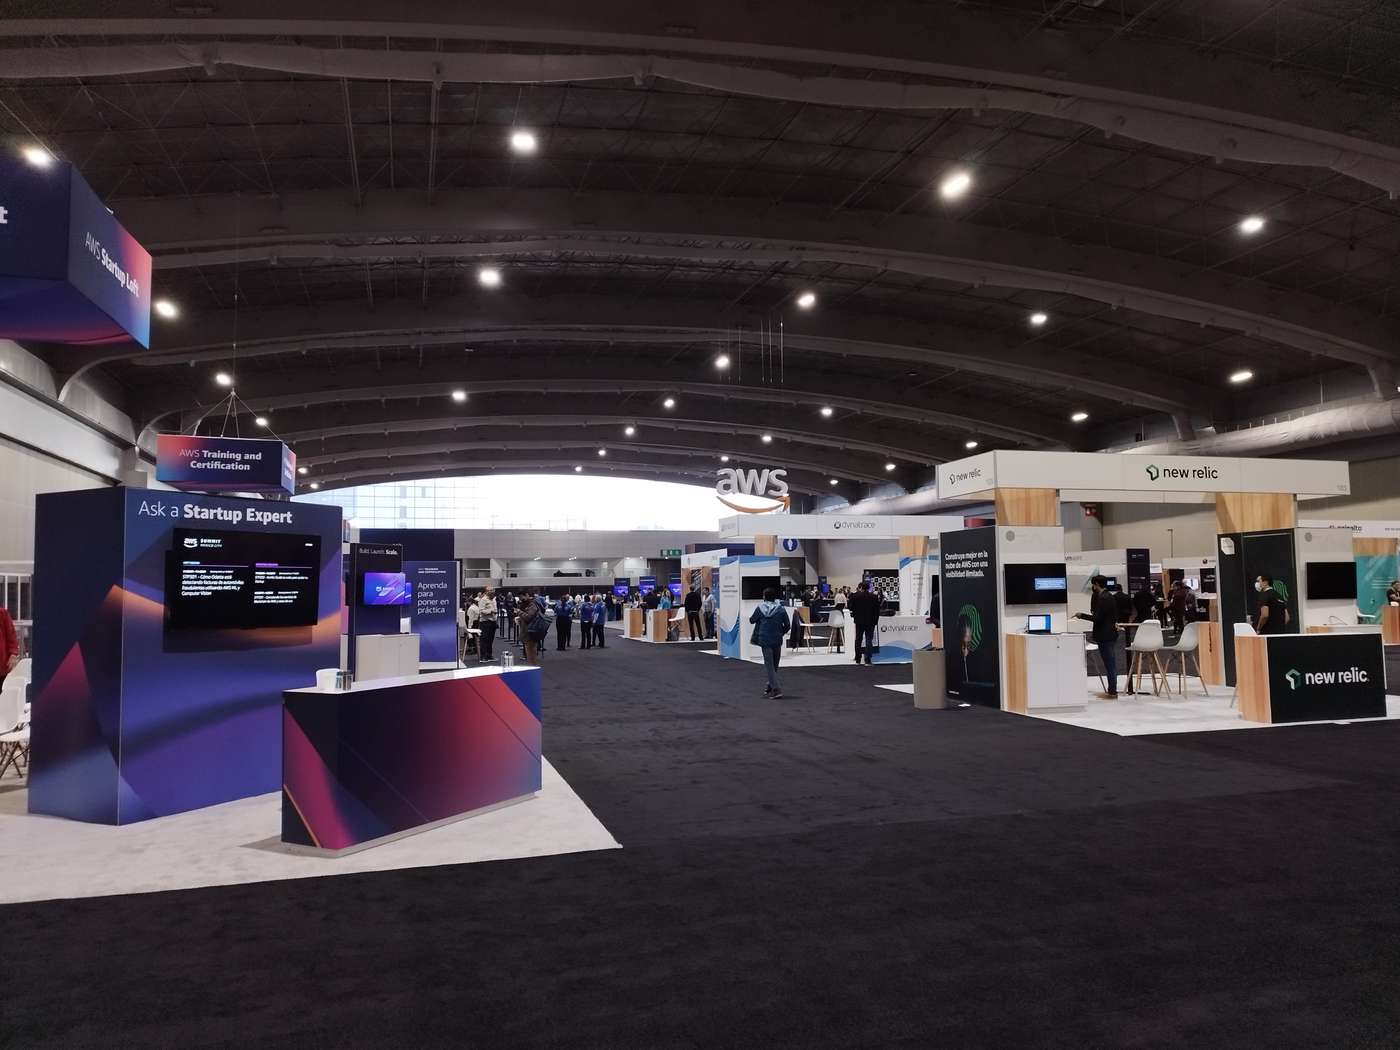 AWS Summit Mexico City Back to InPerson Events Percona Community